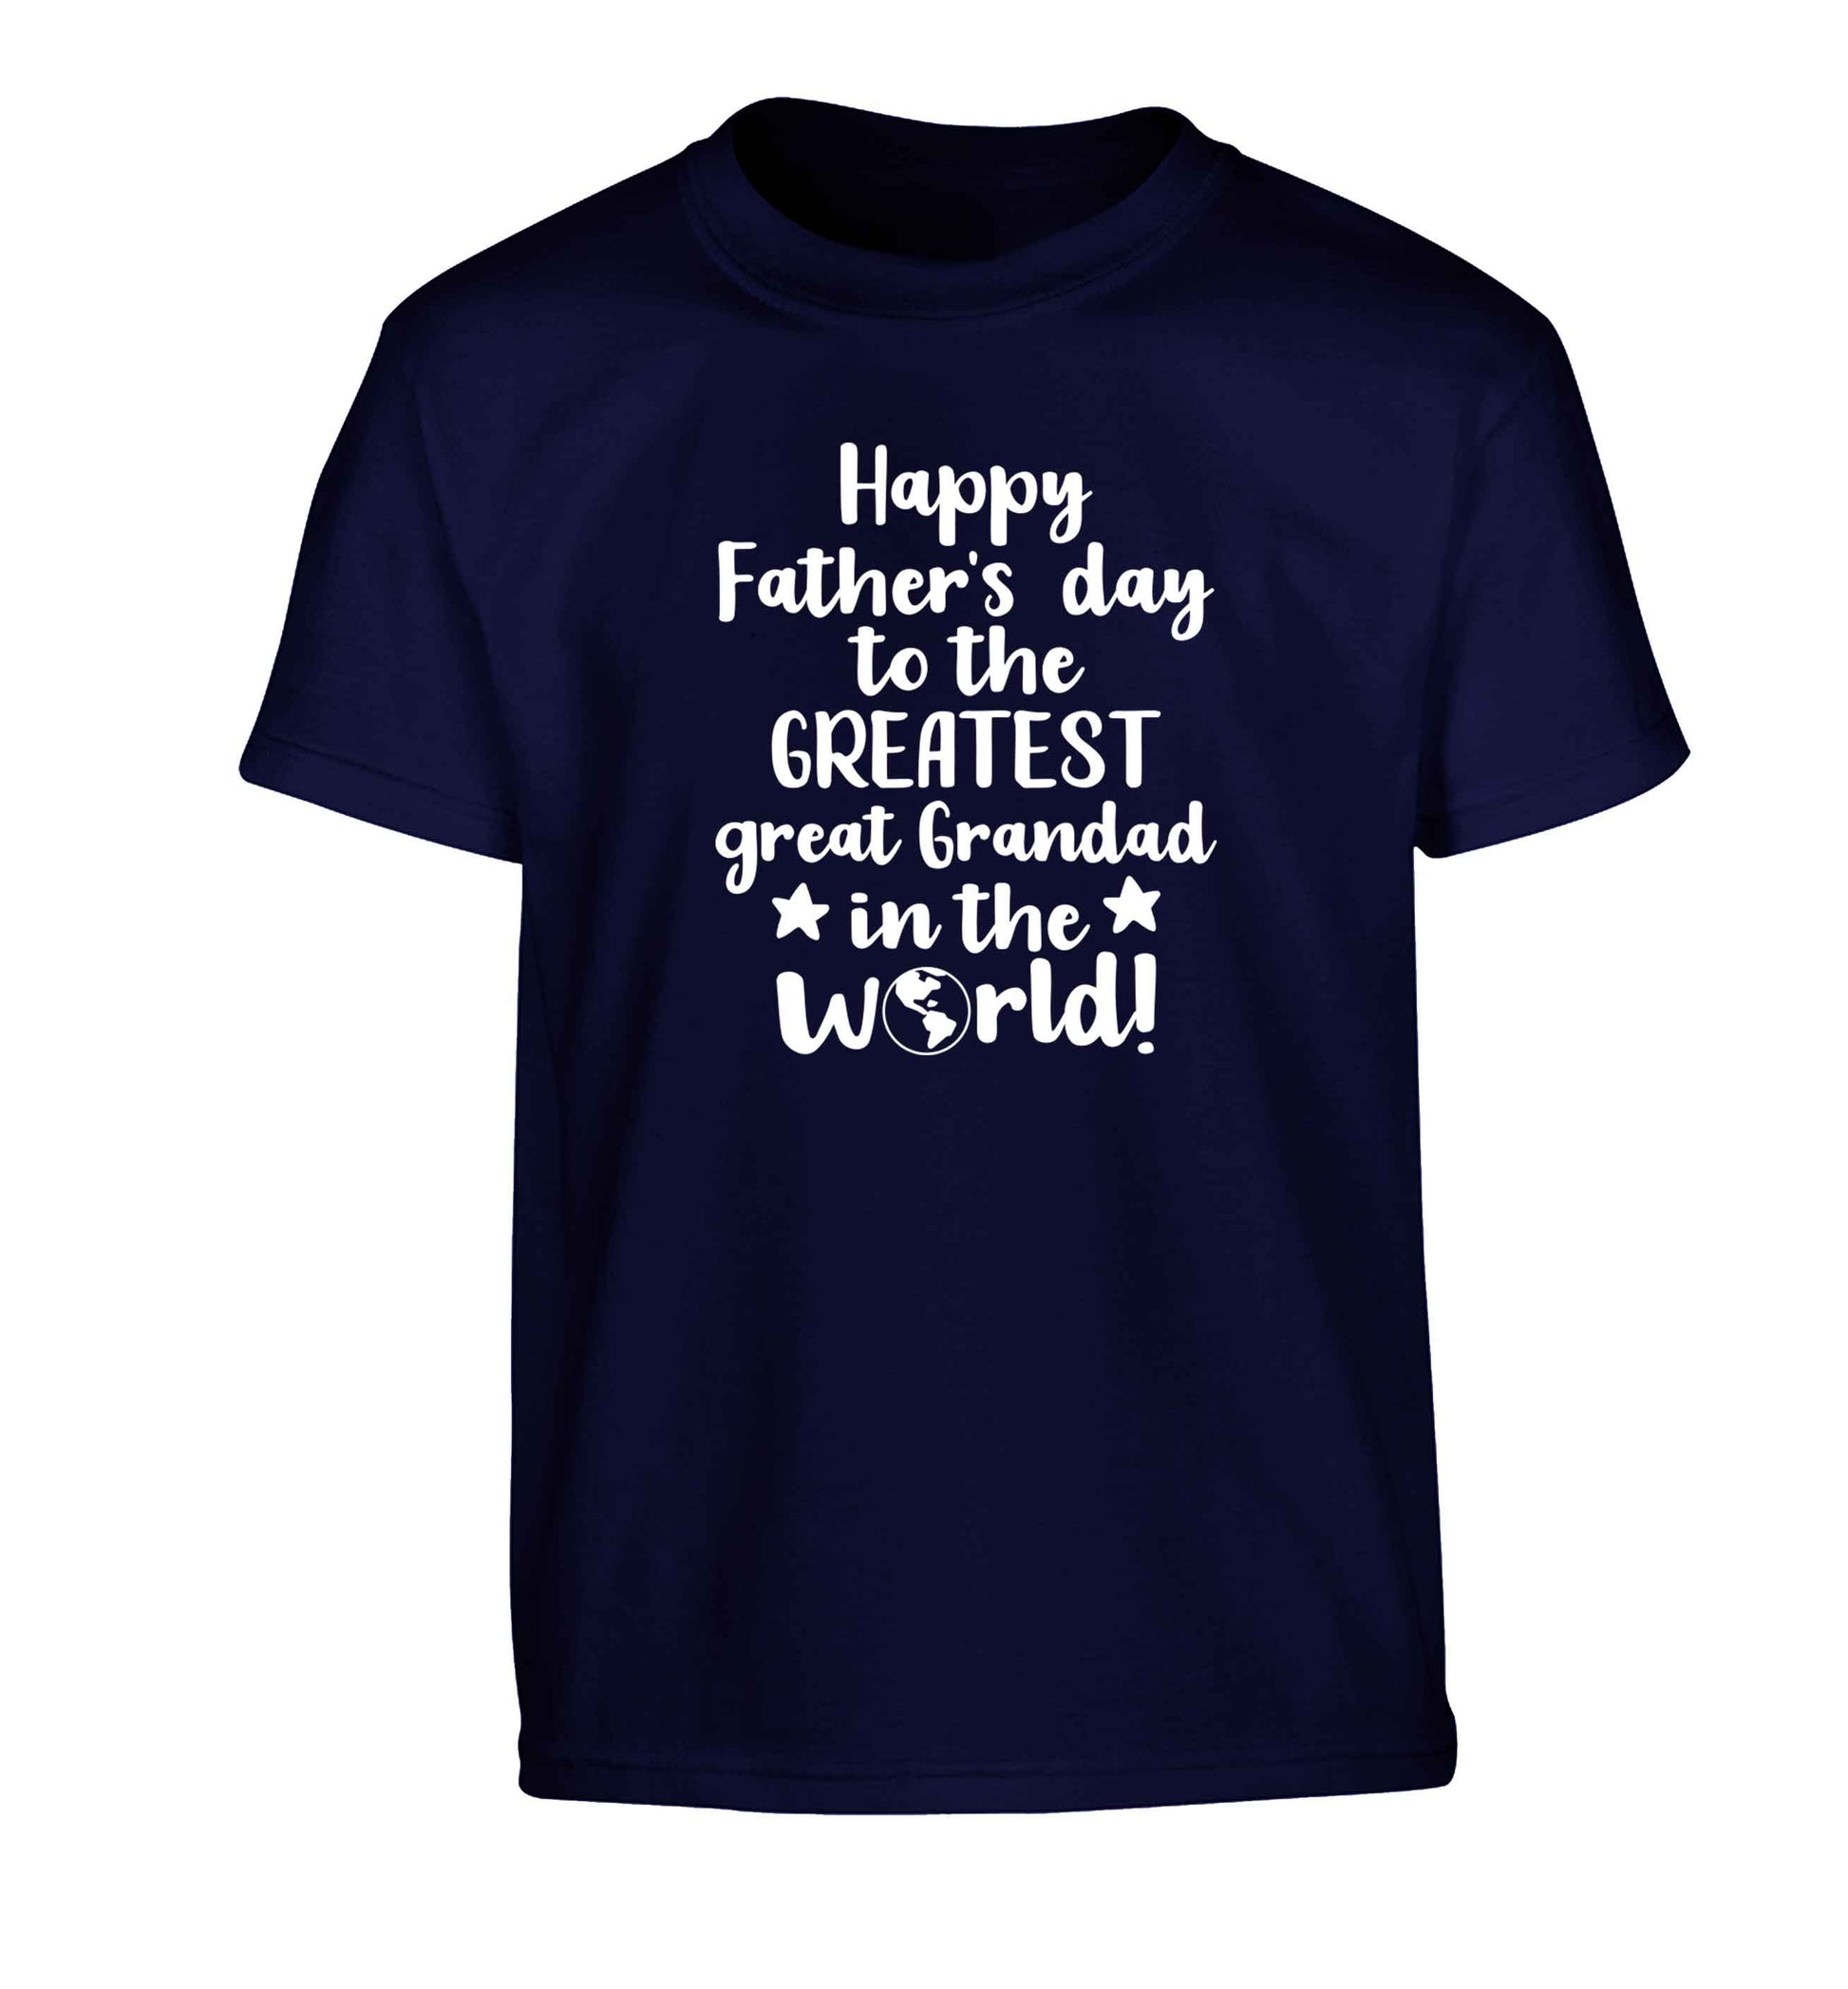 Happy Father's day to the greatest great grandad in the world Children's navy Tshirt 12-13 Years